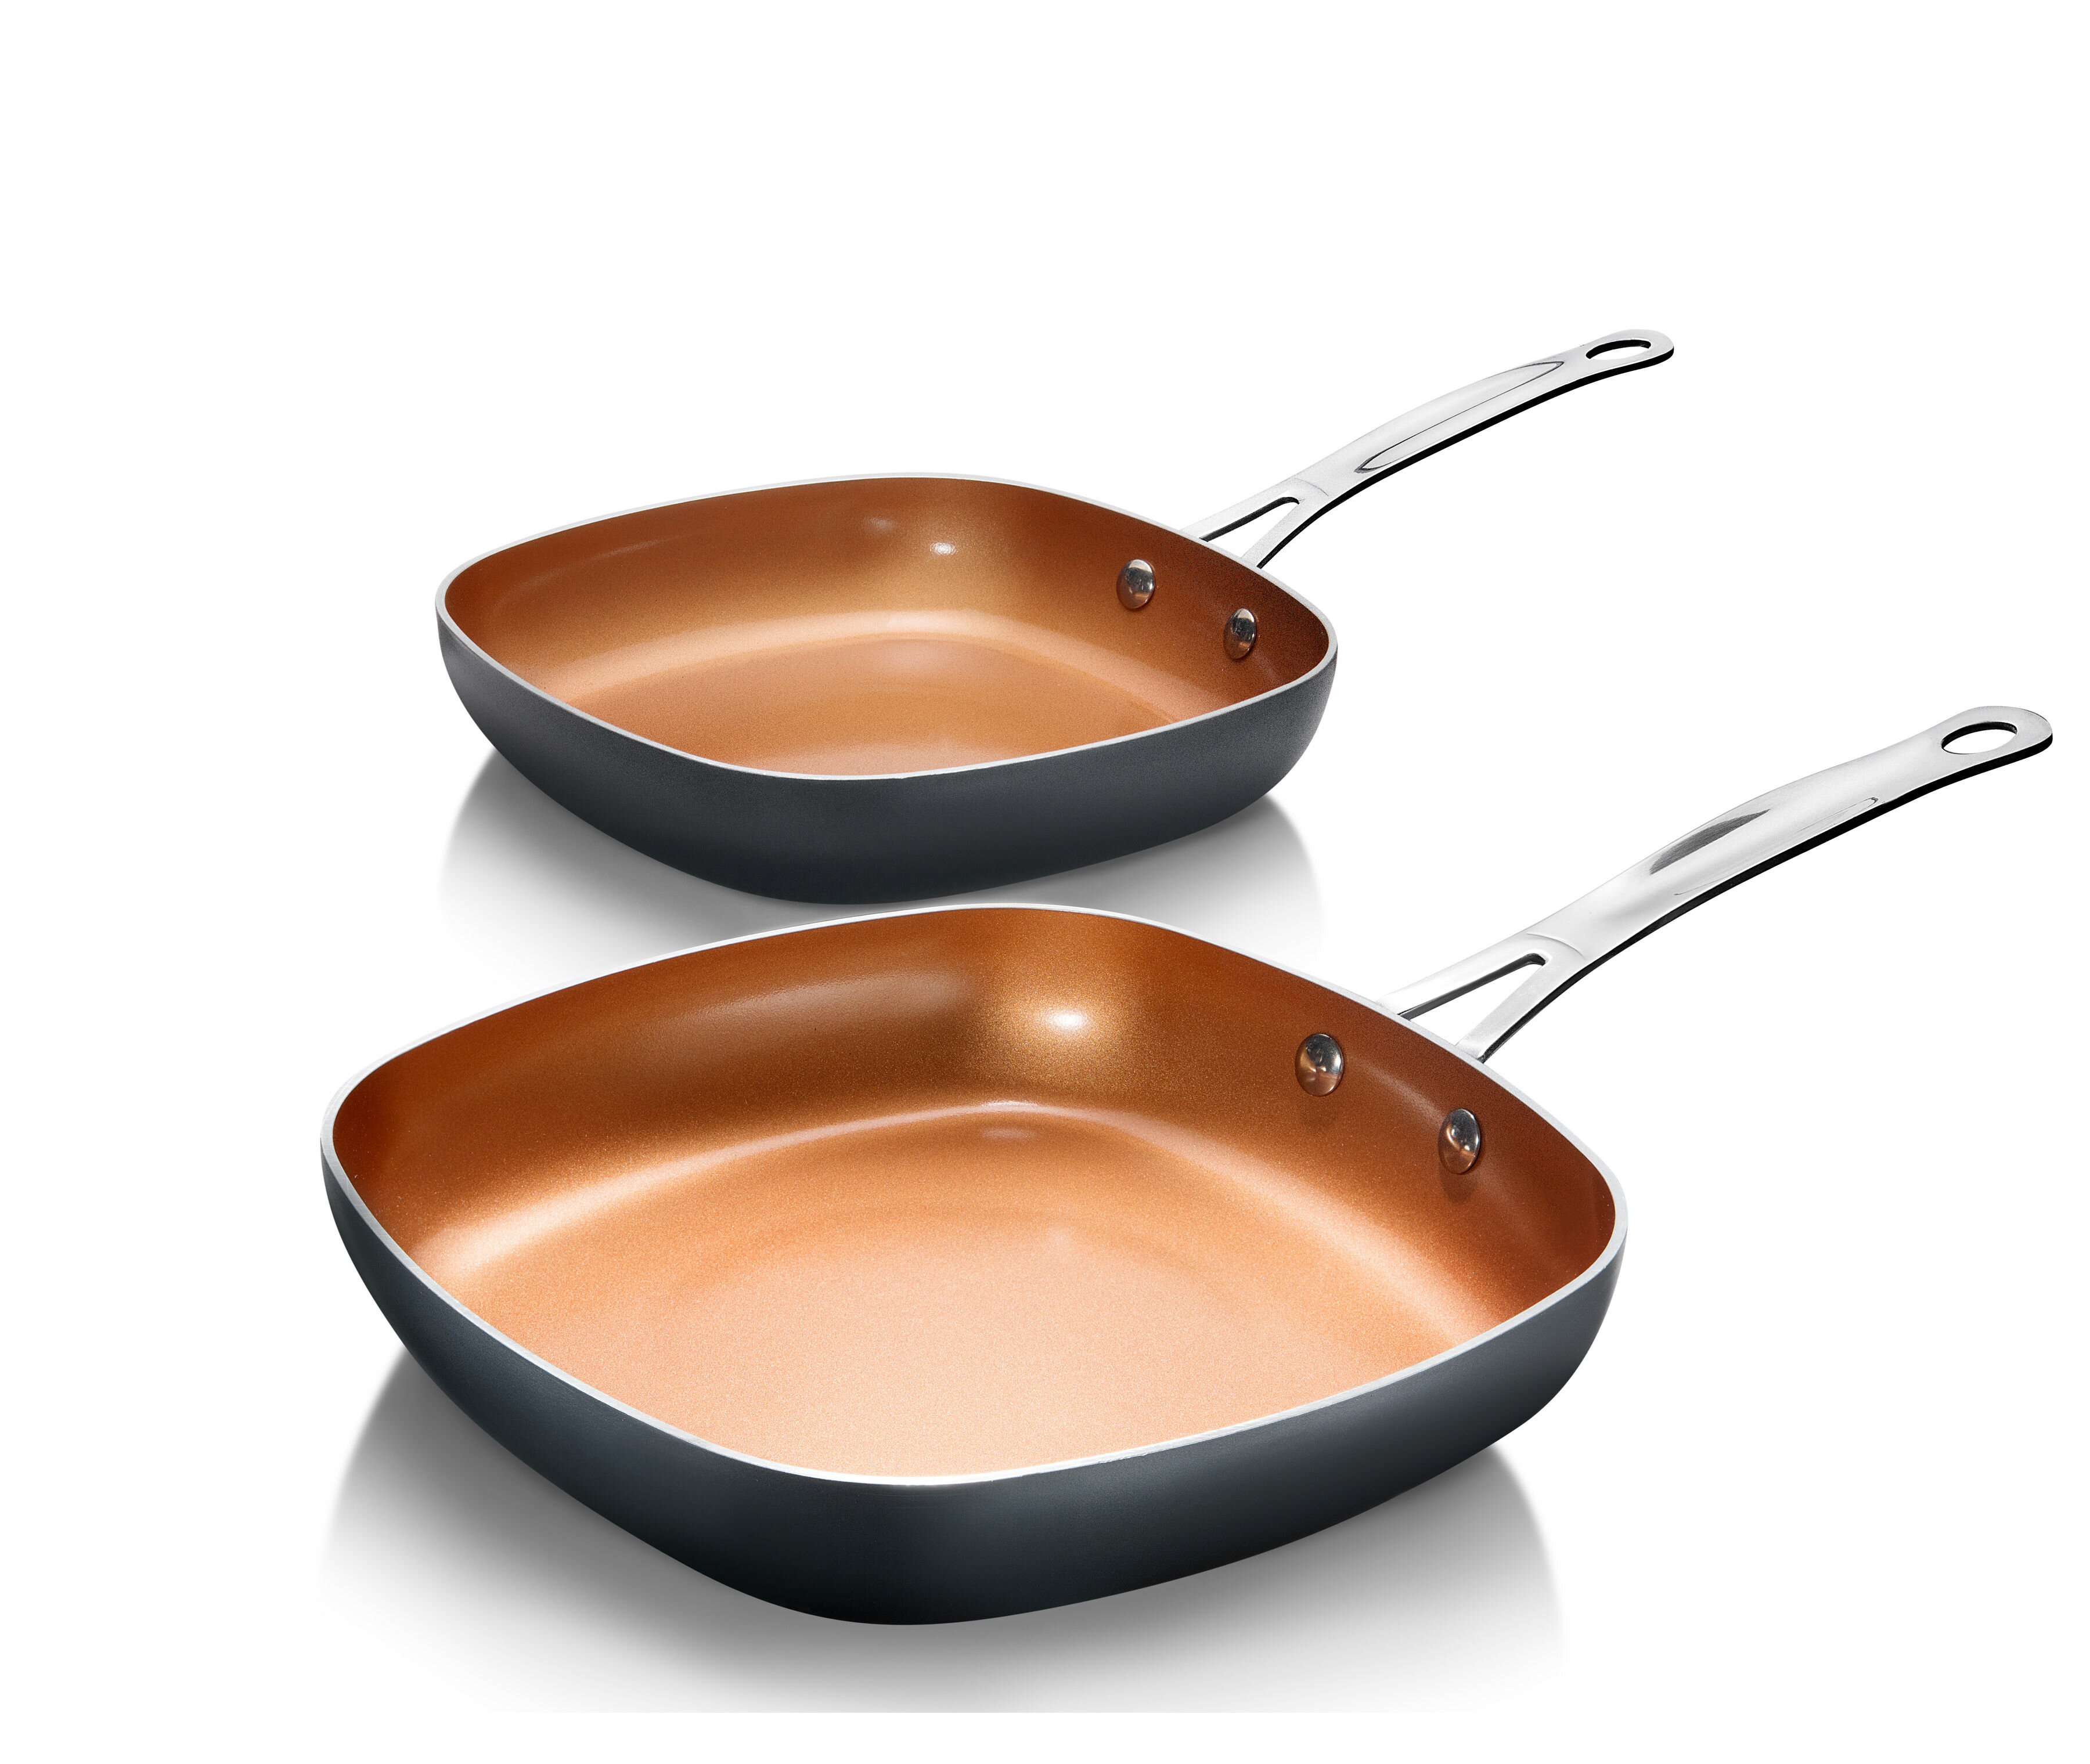 Gotham Steel Hammered Copper Aluminum Non-Stick Pan with Lid - 14 in